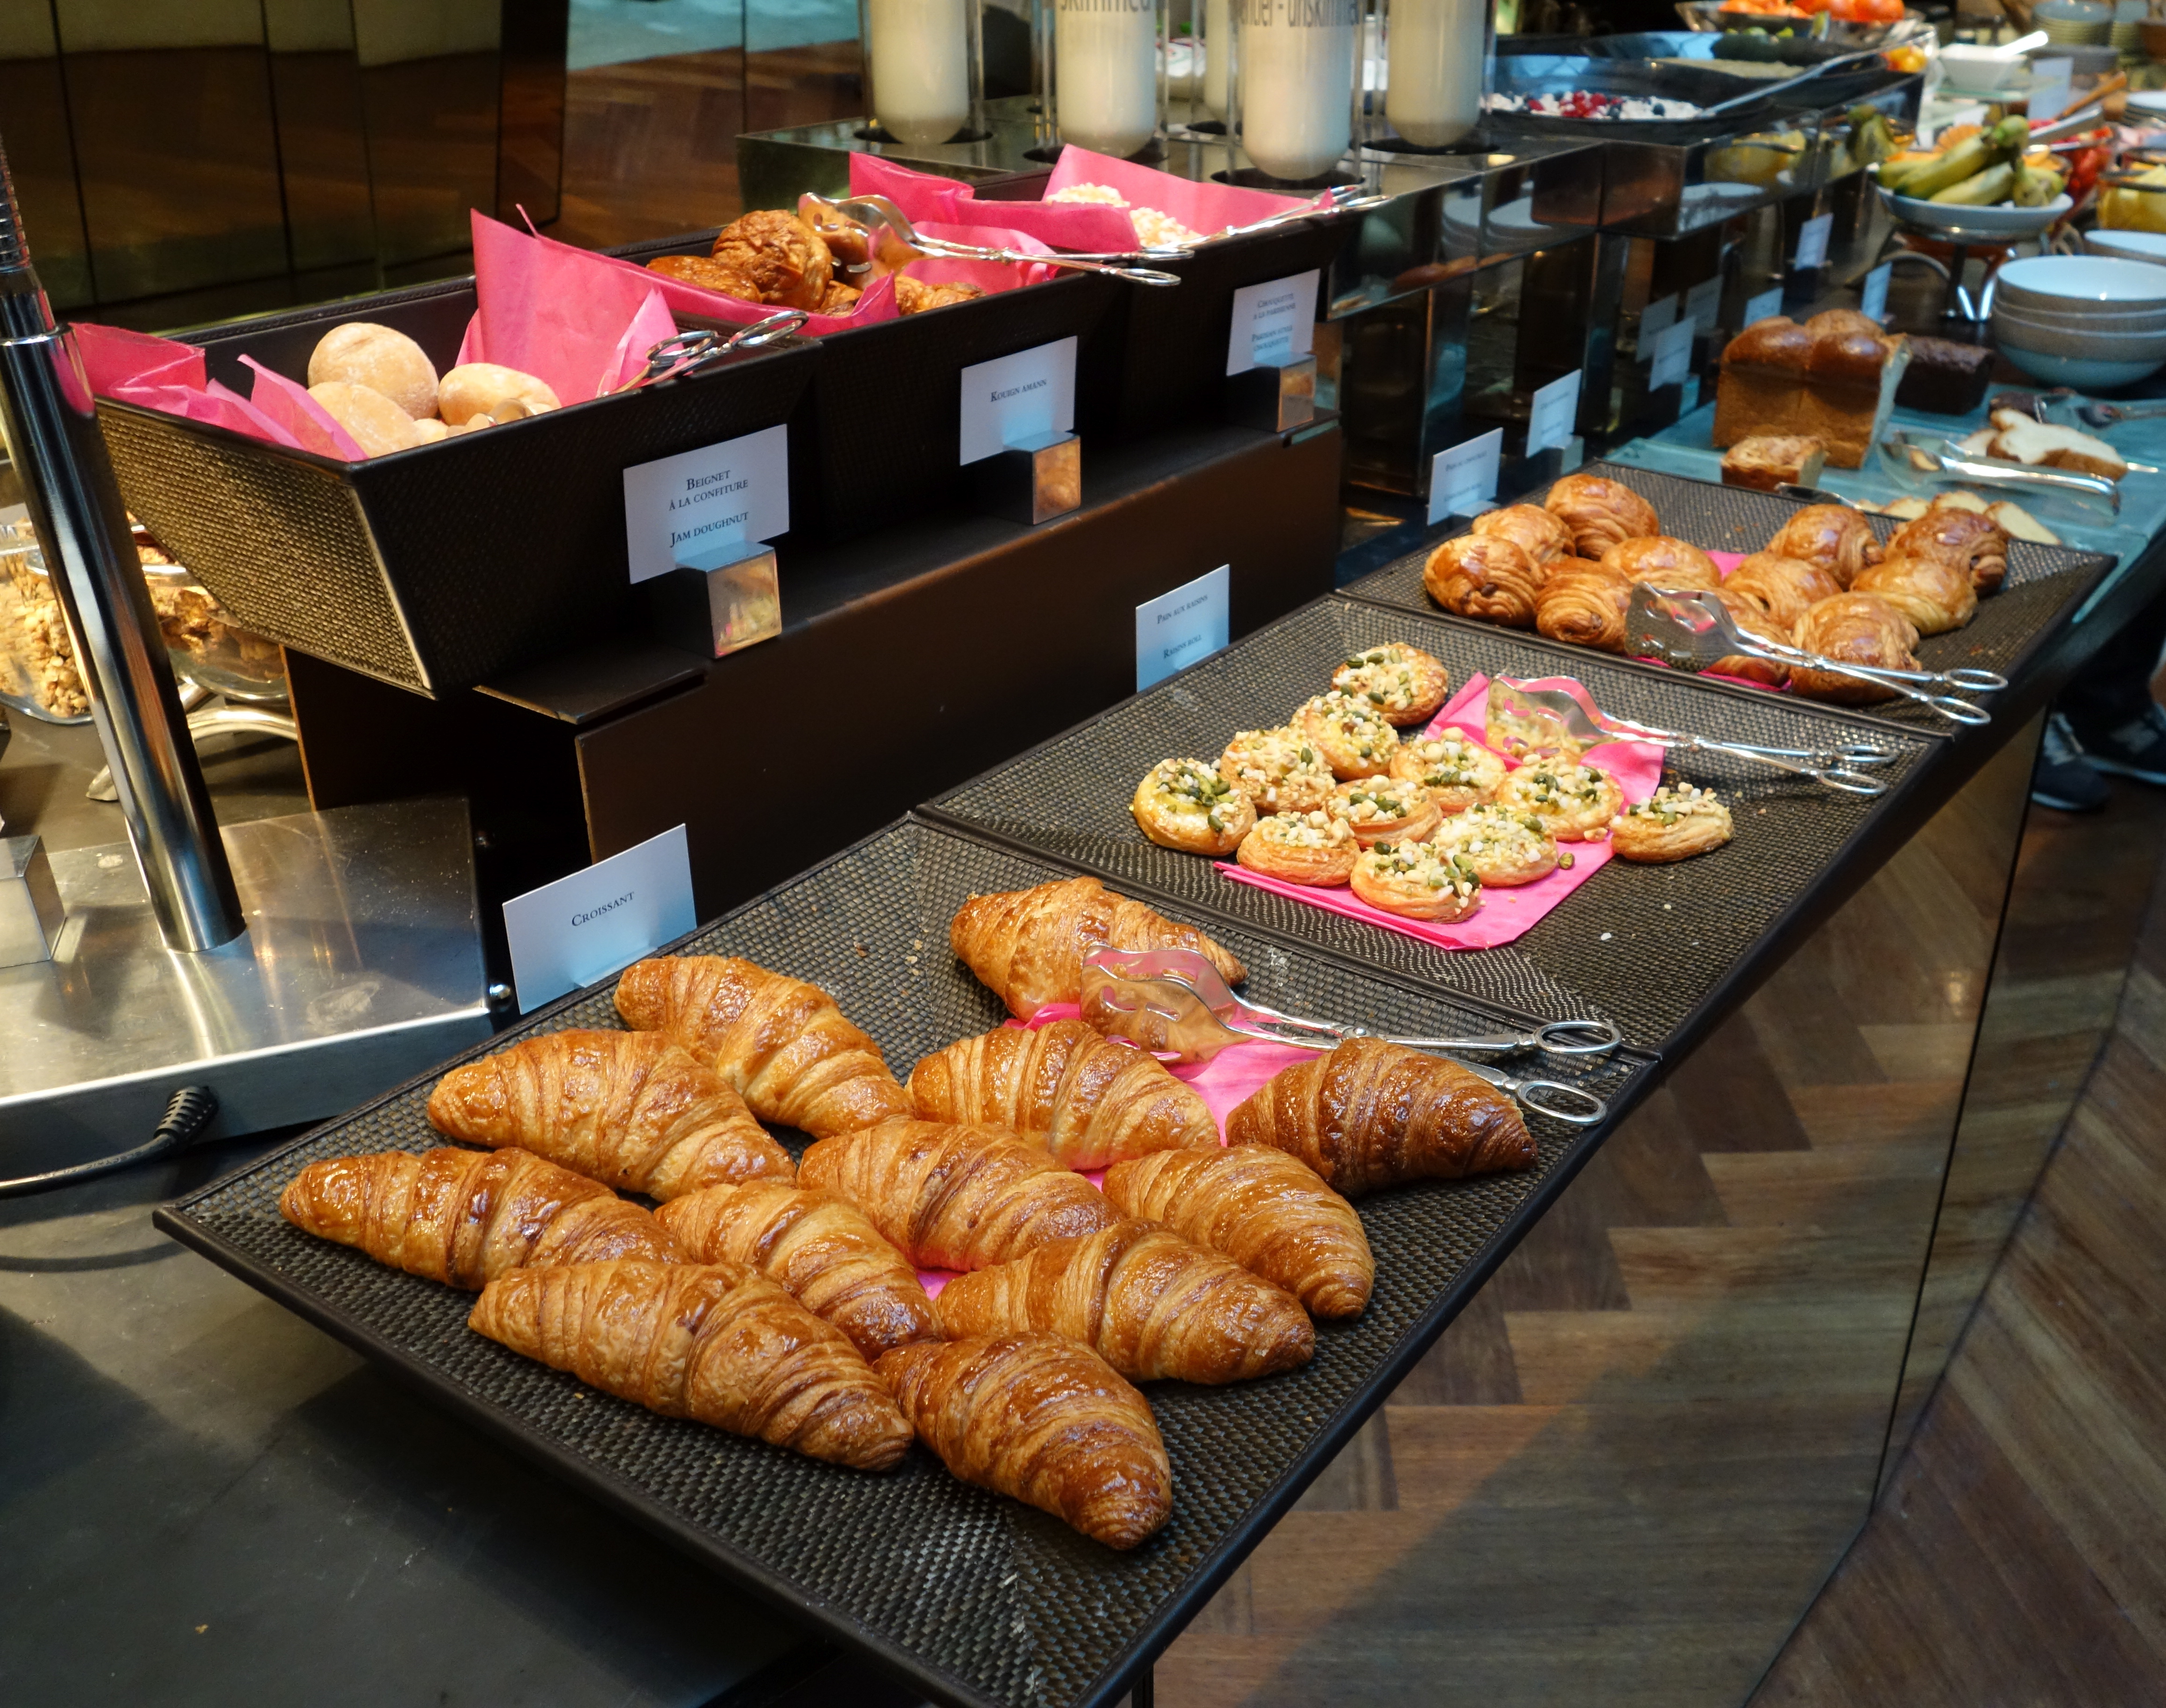 A sample of the breakfast offerings